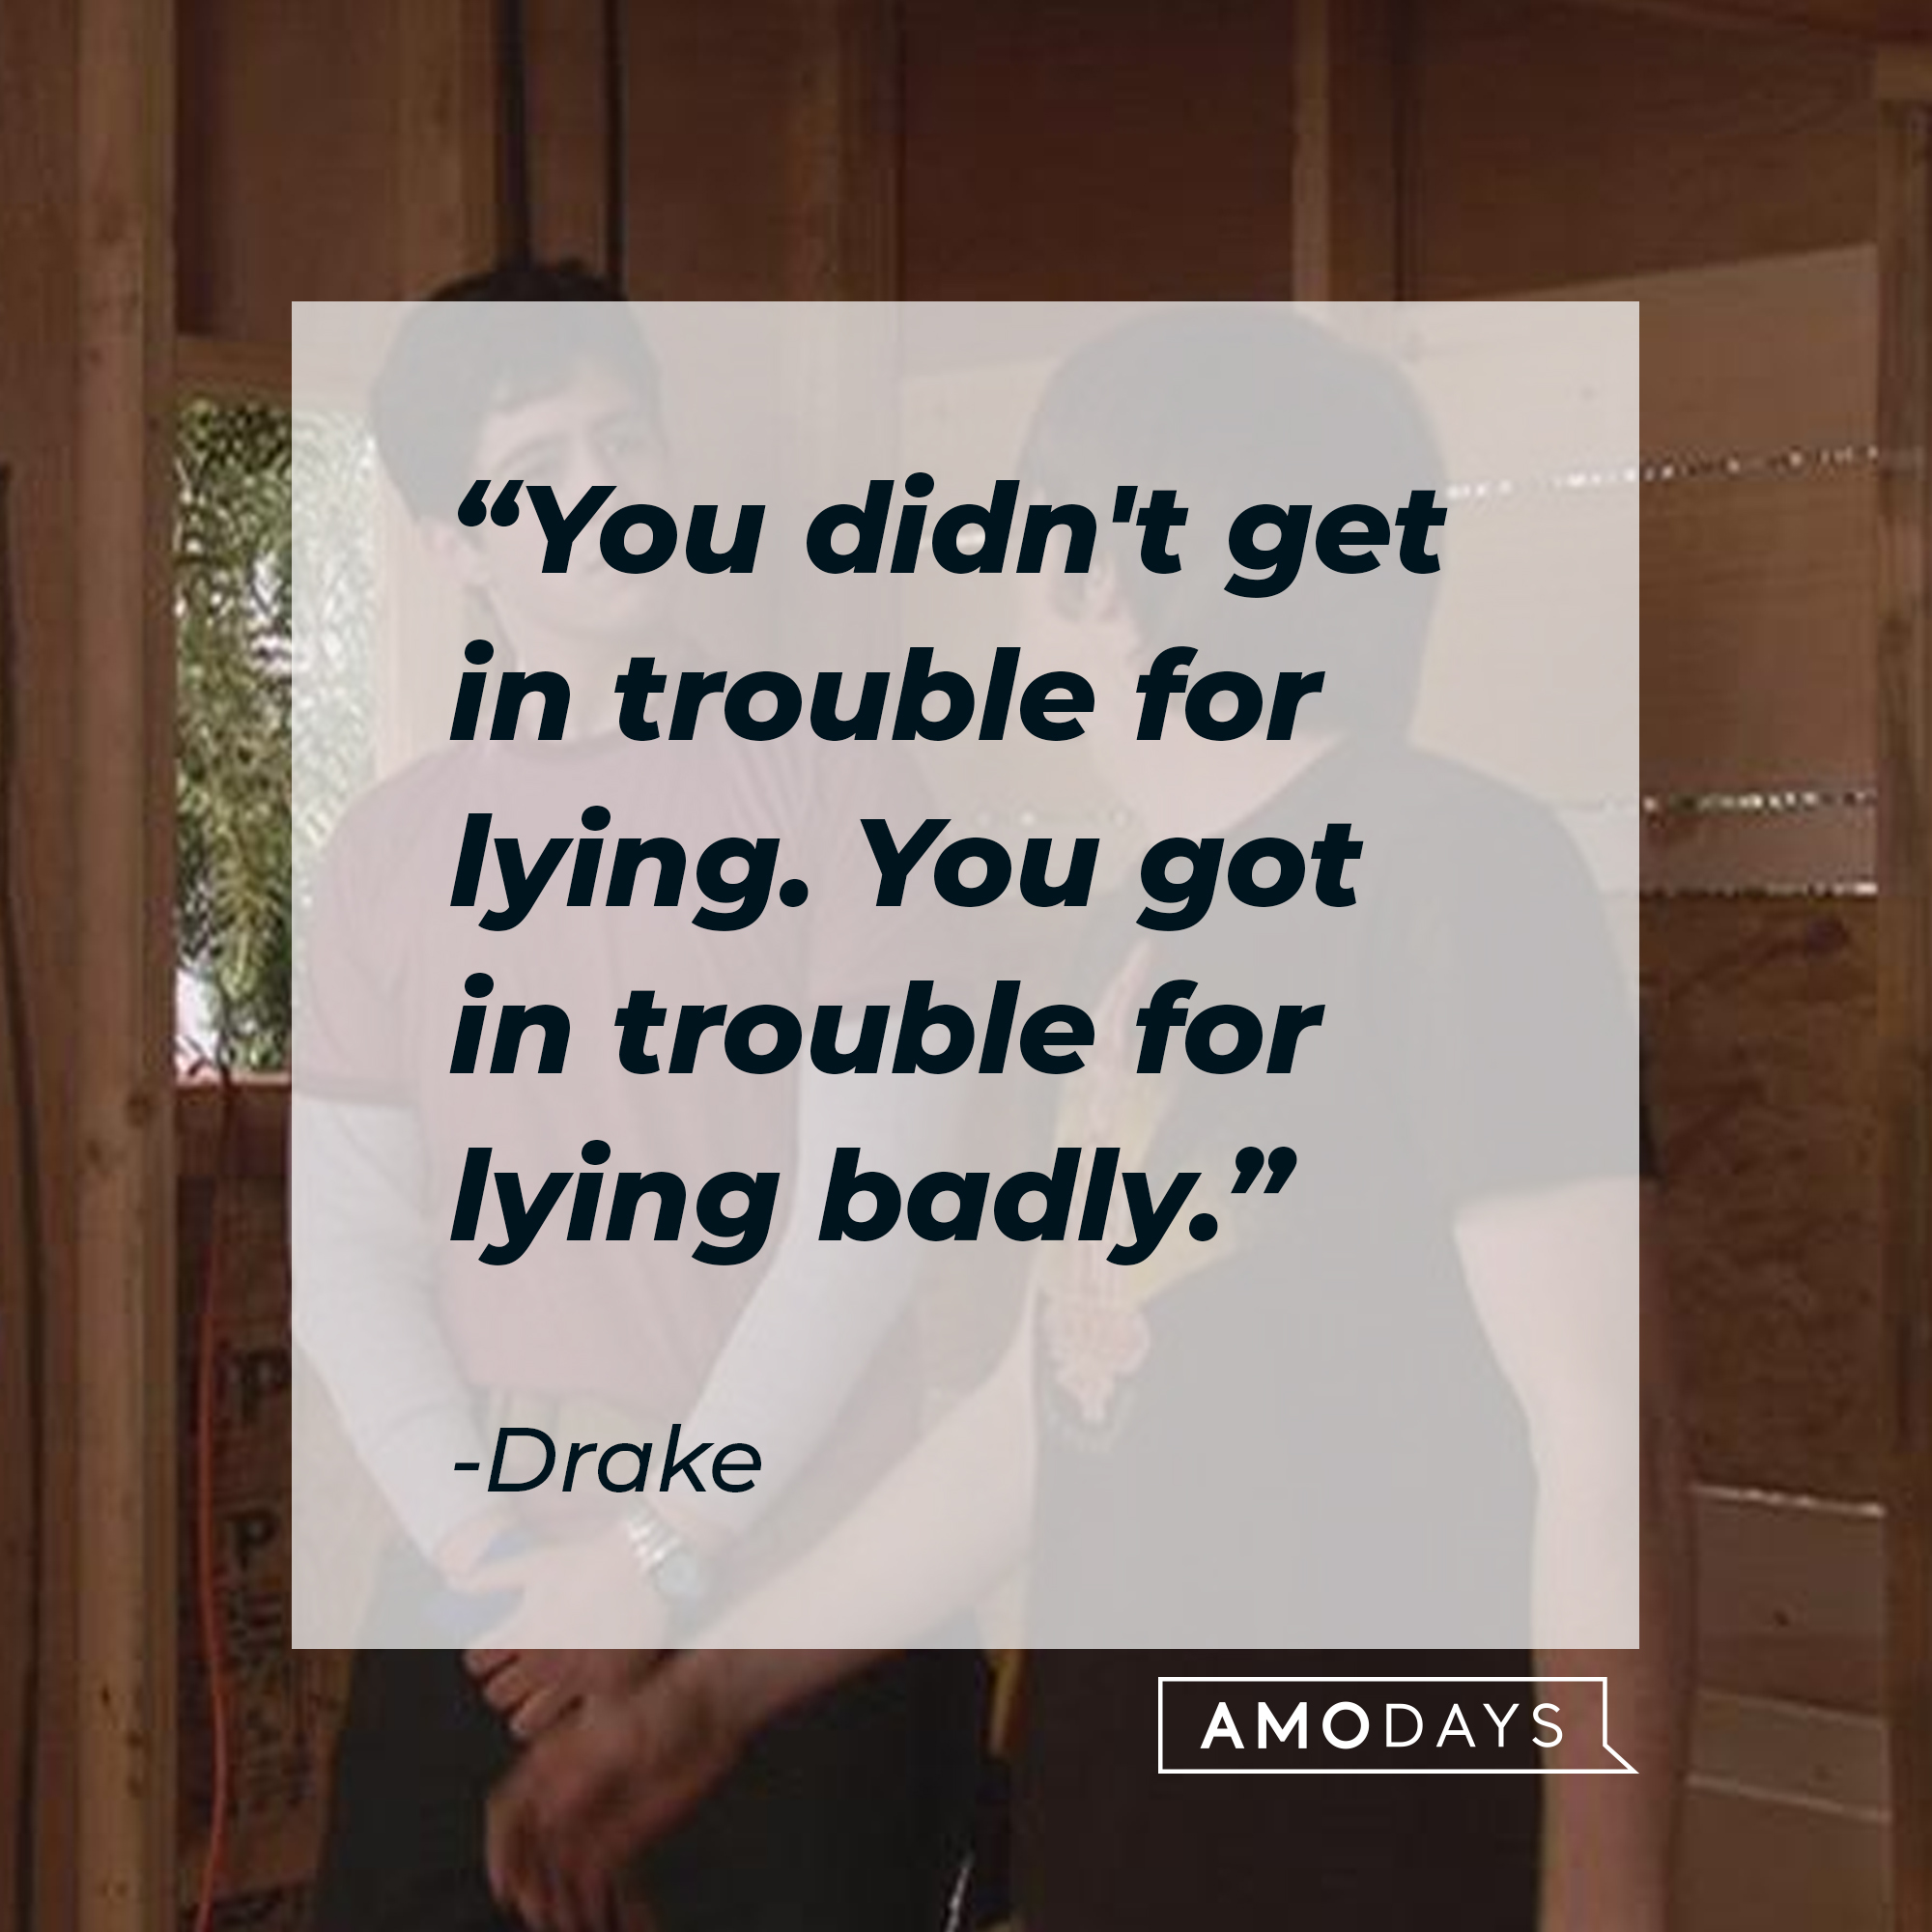 Drake's quote, "You didn't get in trouble for lying. You got in trouble for lying badly." | Source: facebook.com/Drake & Josh